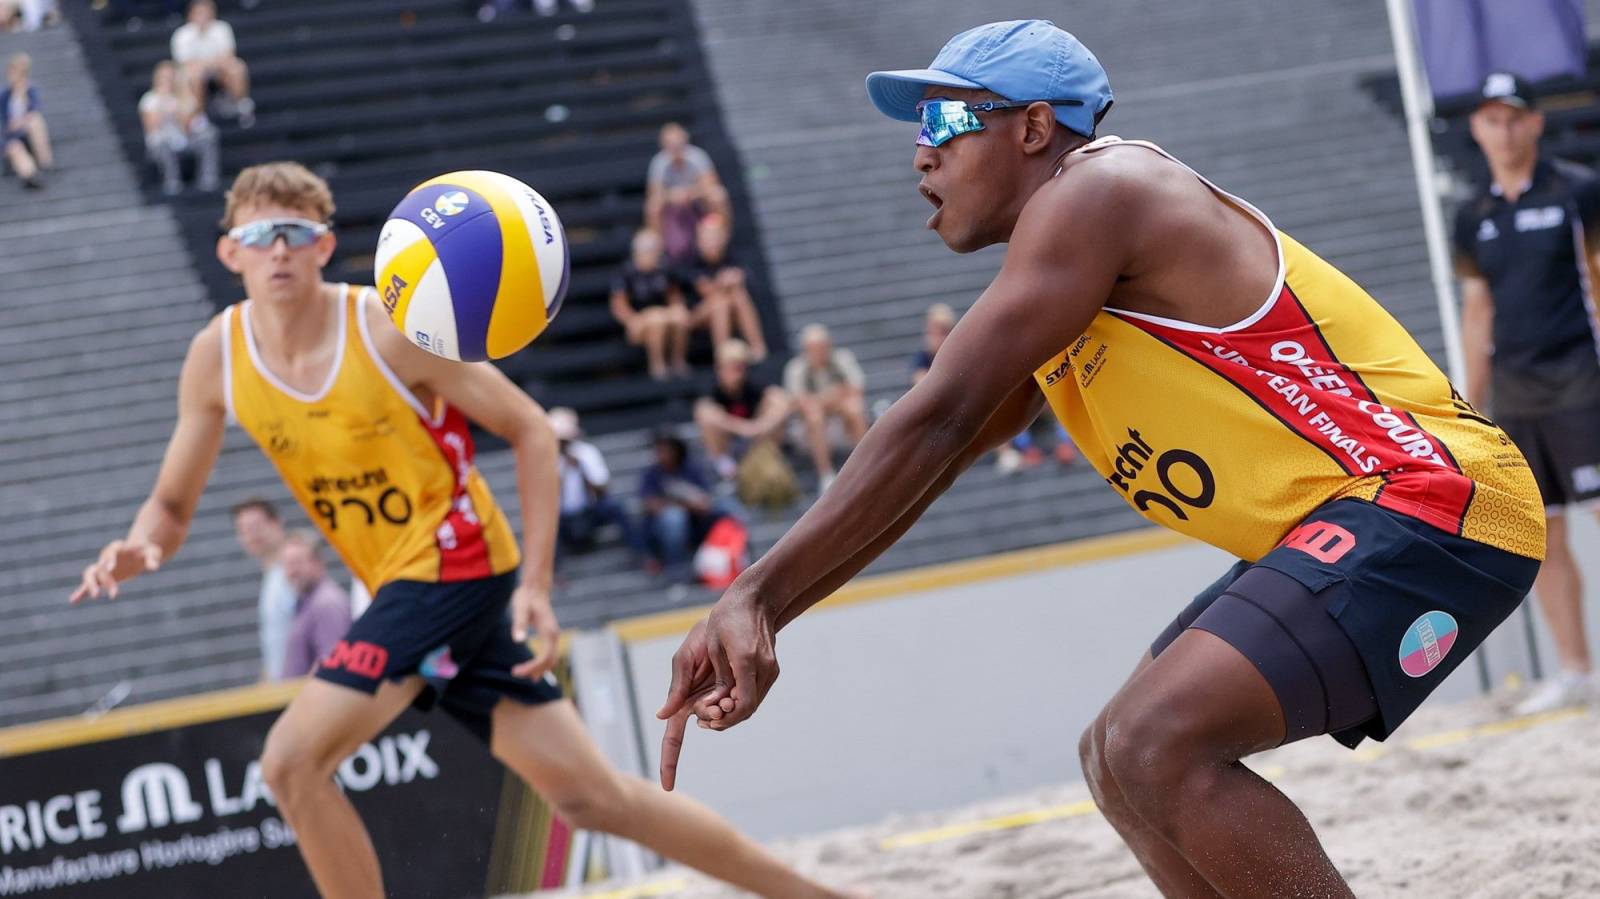 Freddie Bialokoz and Issa Batrane become first England team to qualify for main draw in an FIVB Challenger